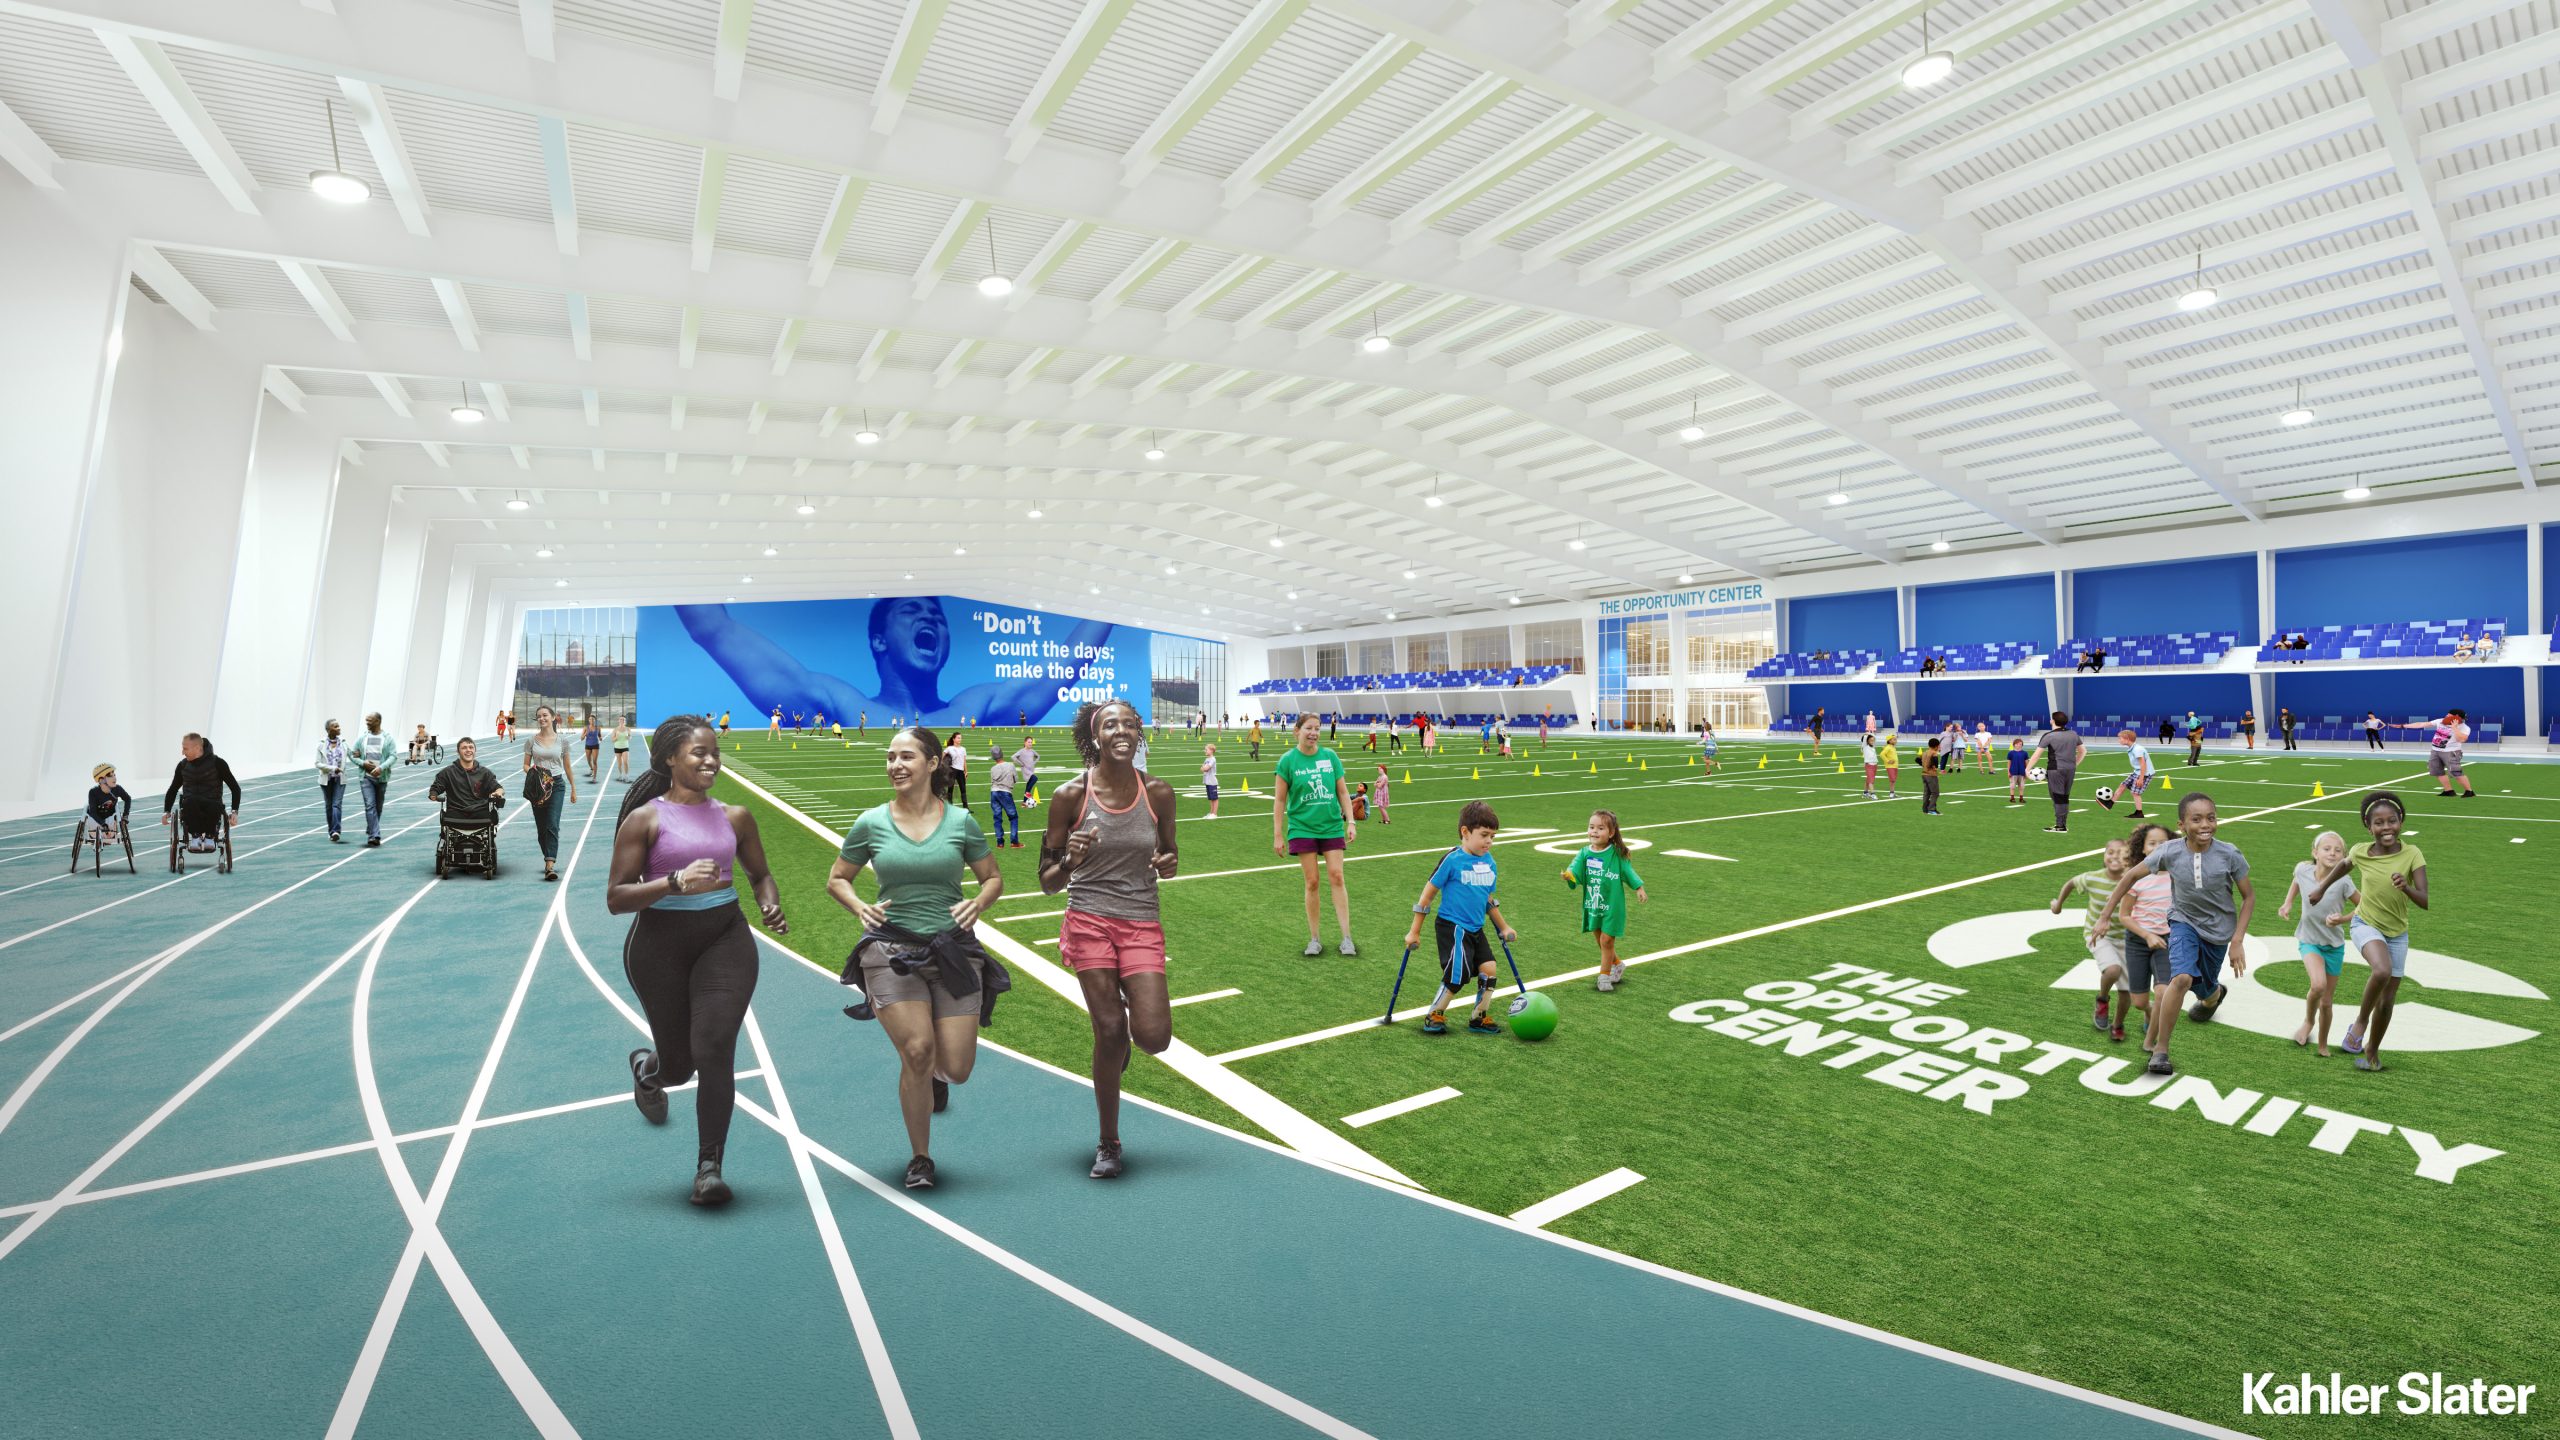 The Opportunity Center track and field facility. Rendering by Kahler Slater.